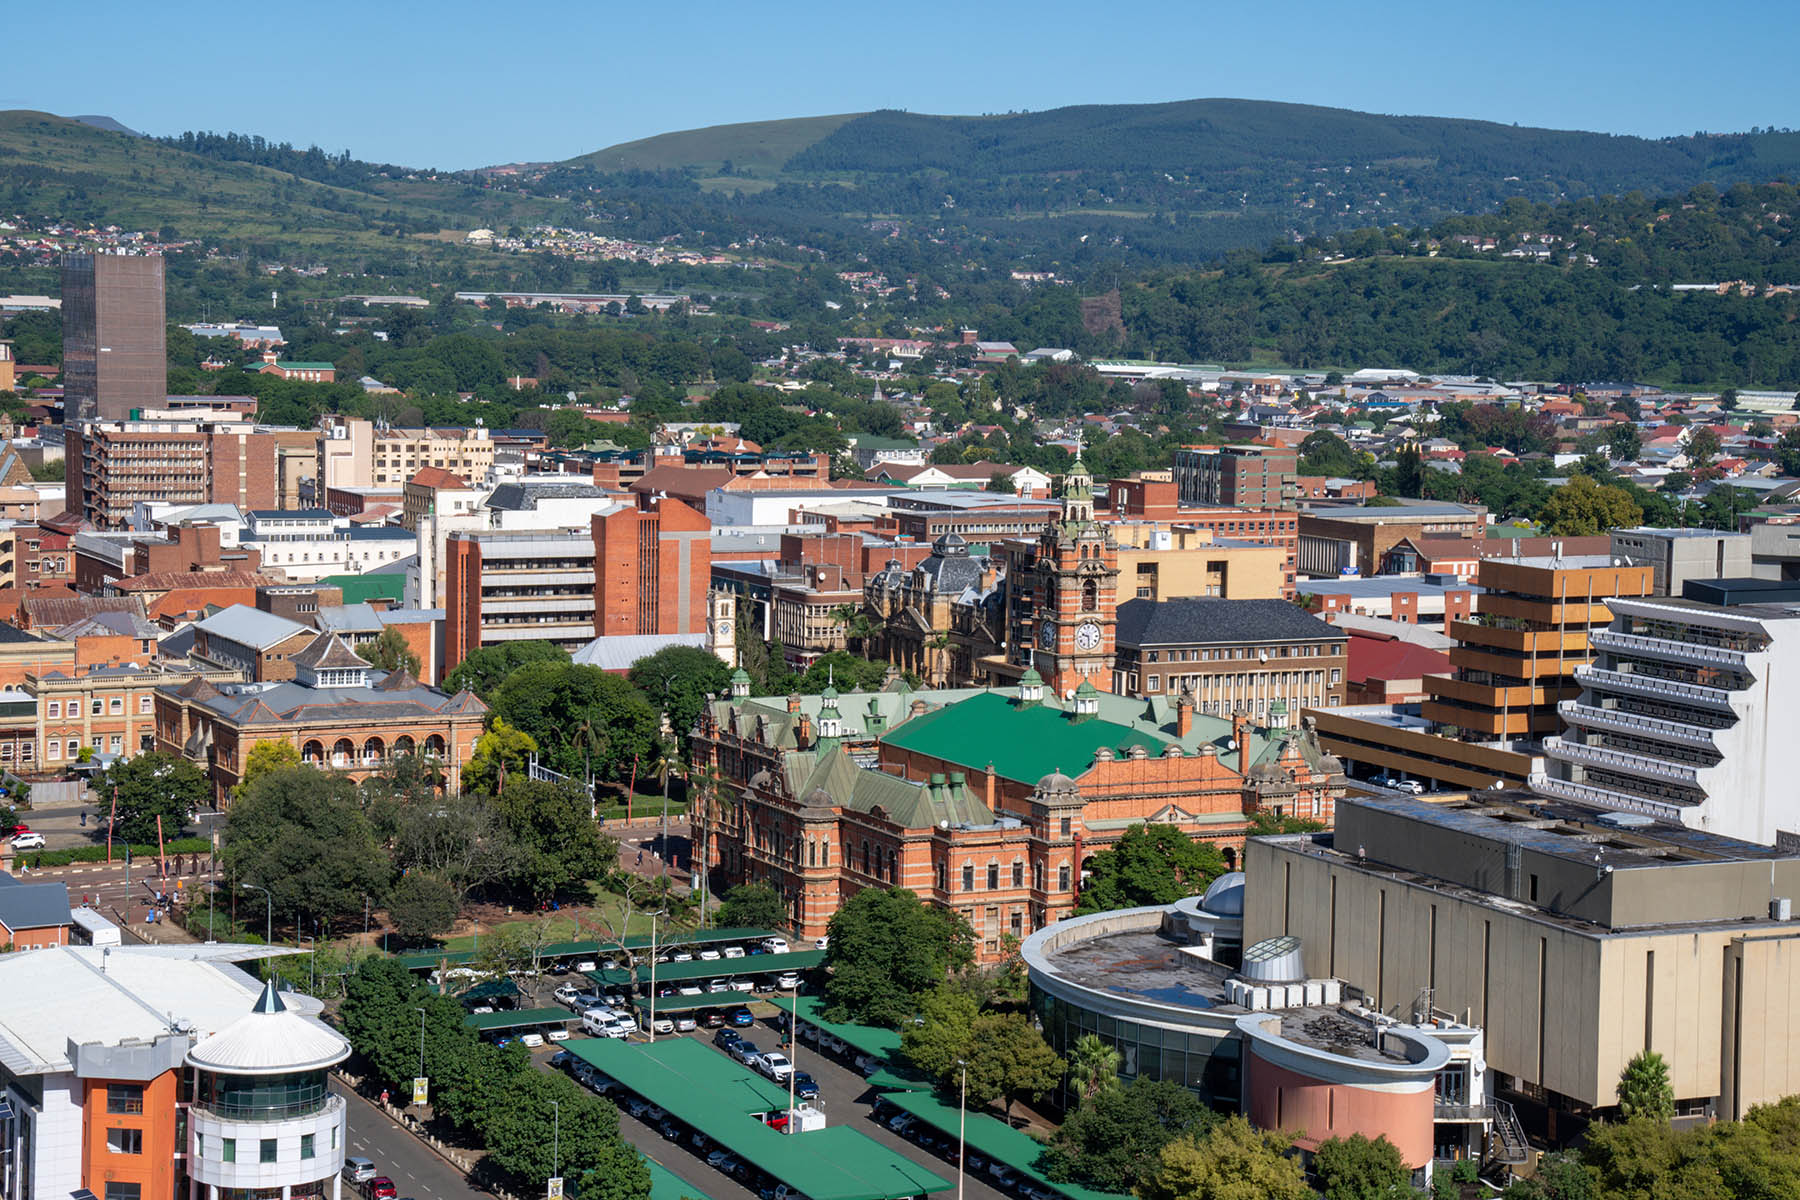 Pietermartizburg in KZN, South Africa, area with high crime rates